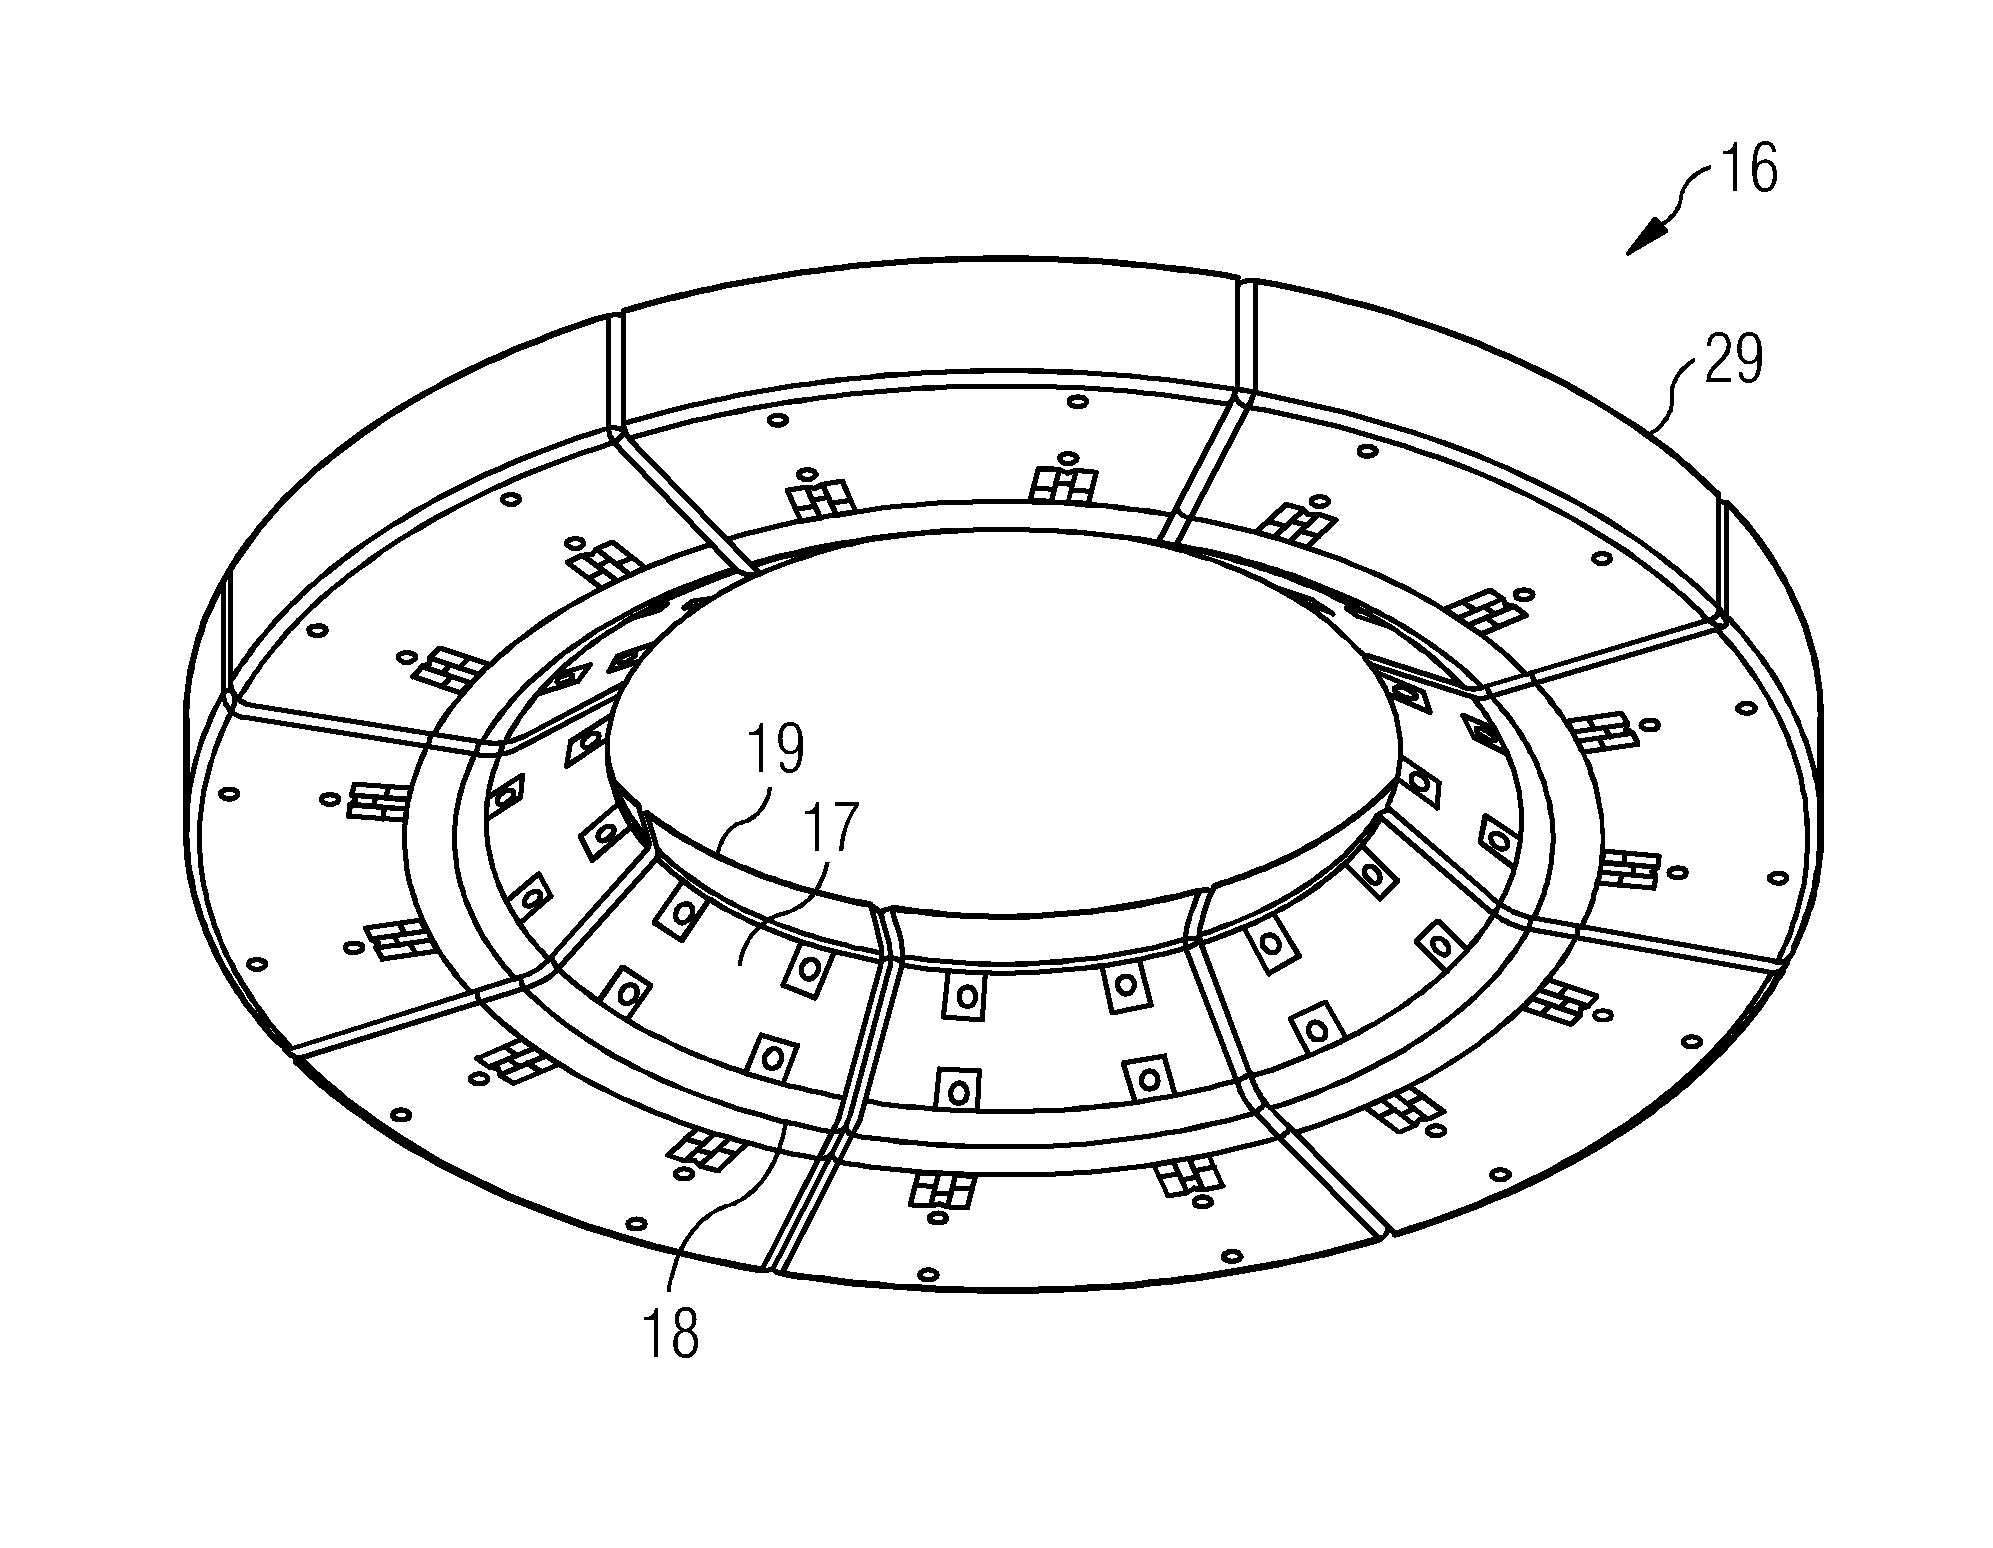 Cooling device for cooling a winding braid of an electrical machine and method for retrofitting the electrical machine with the cooling device